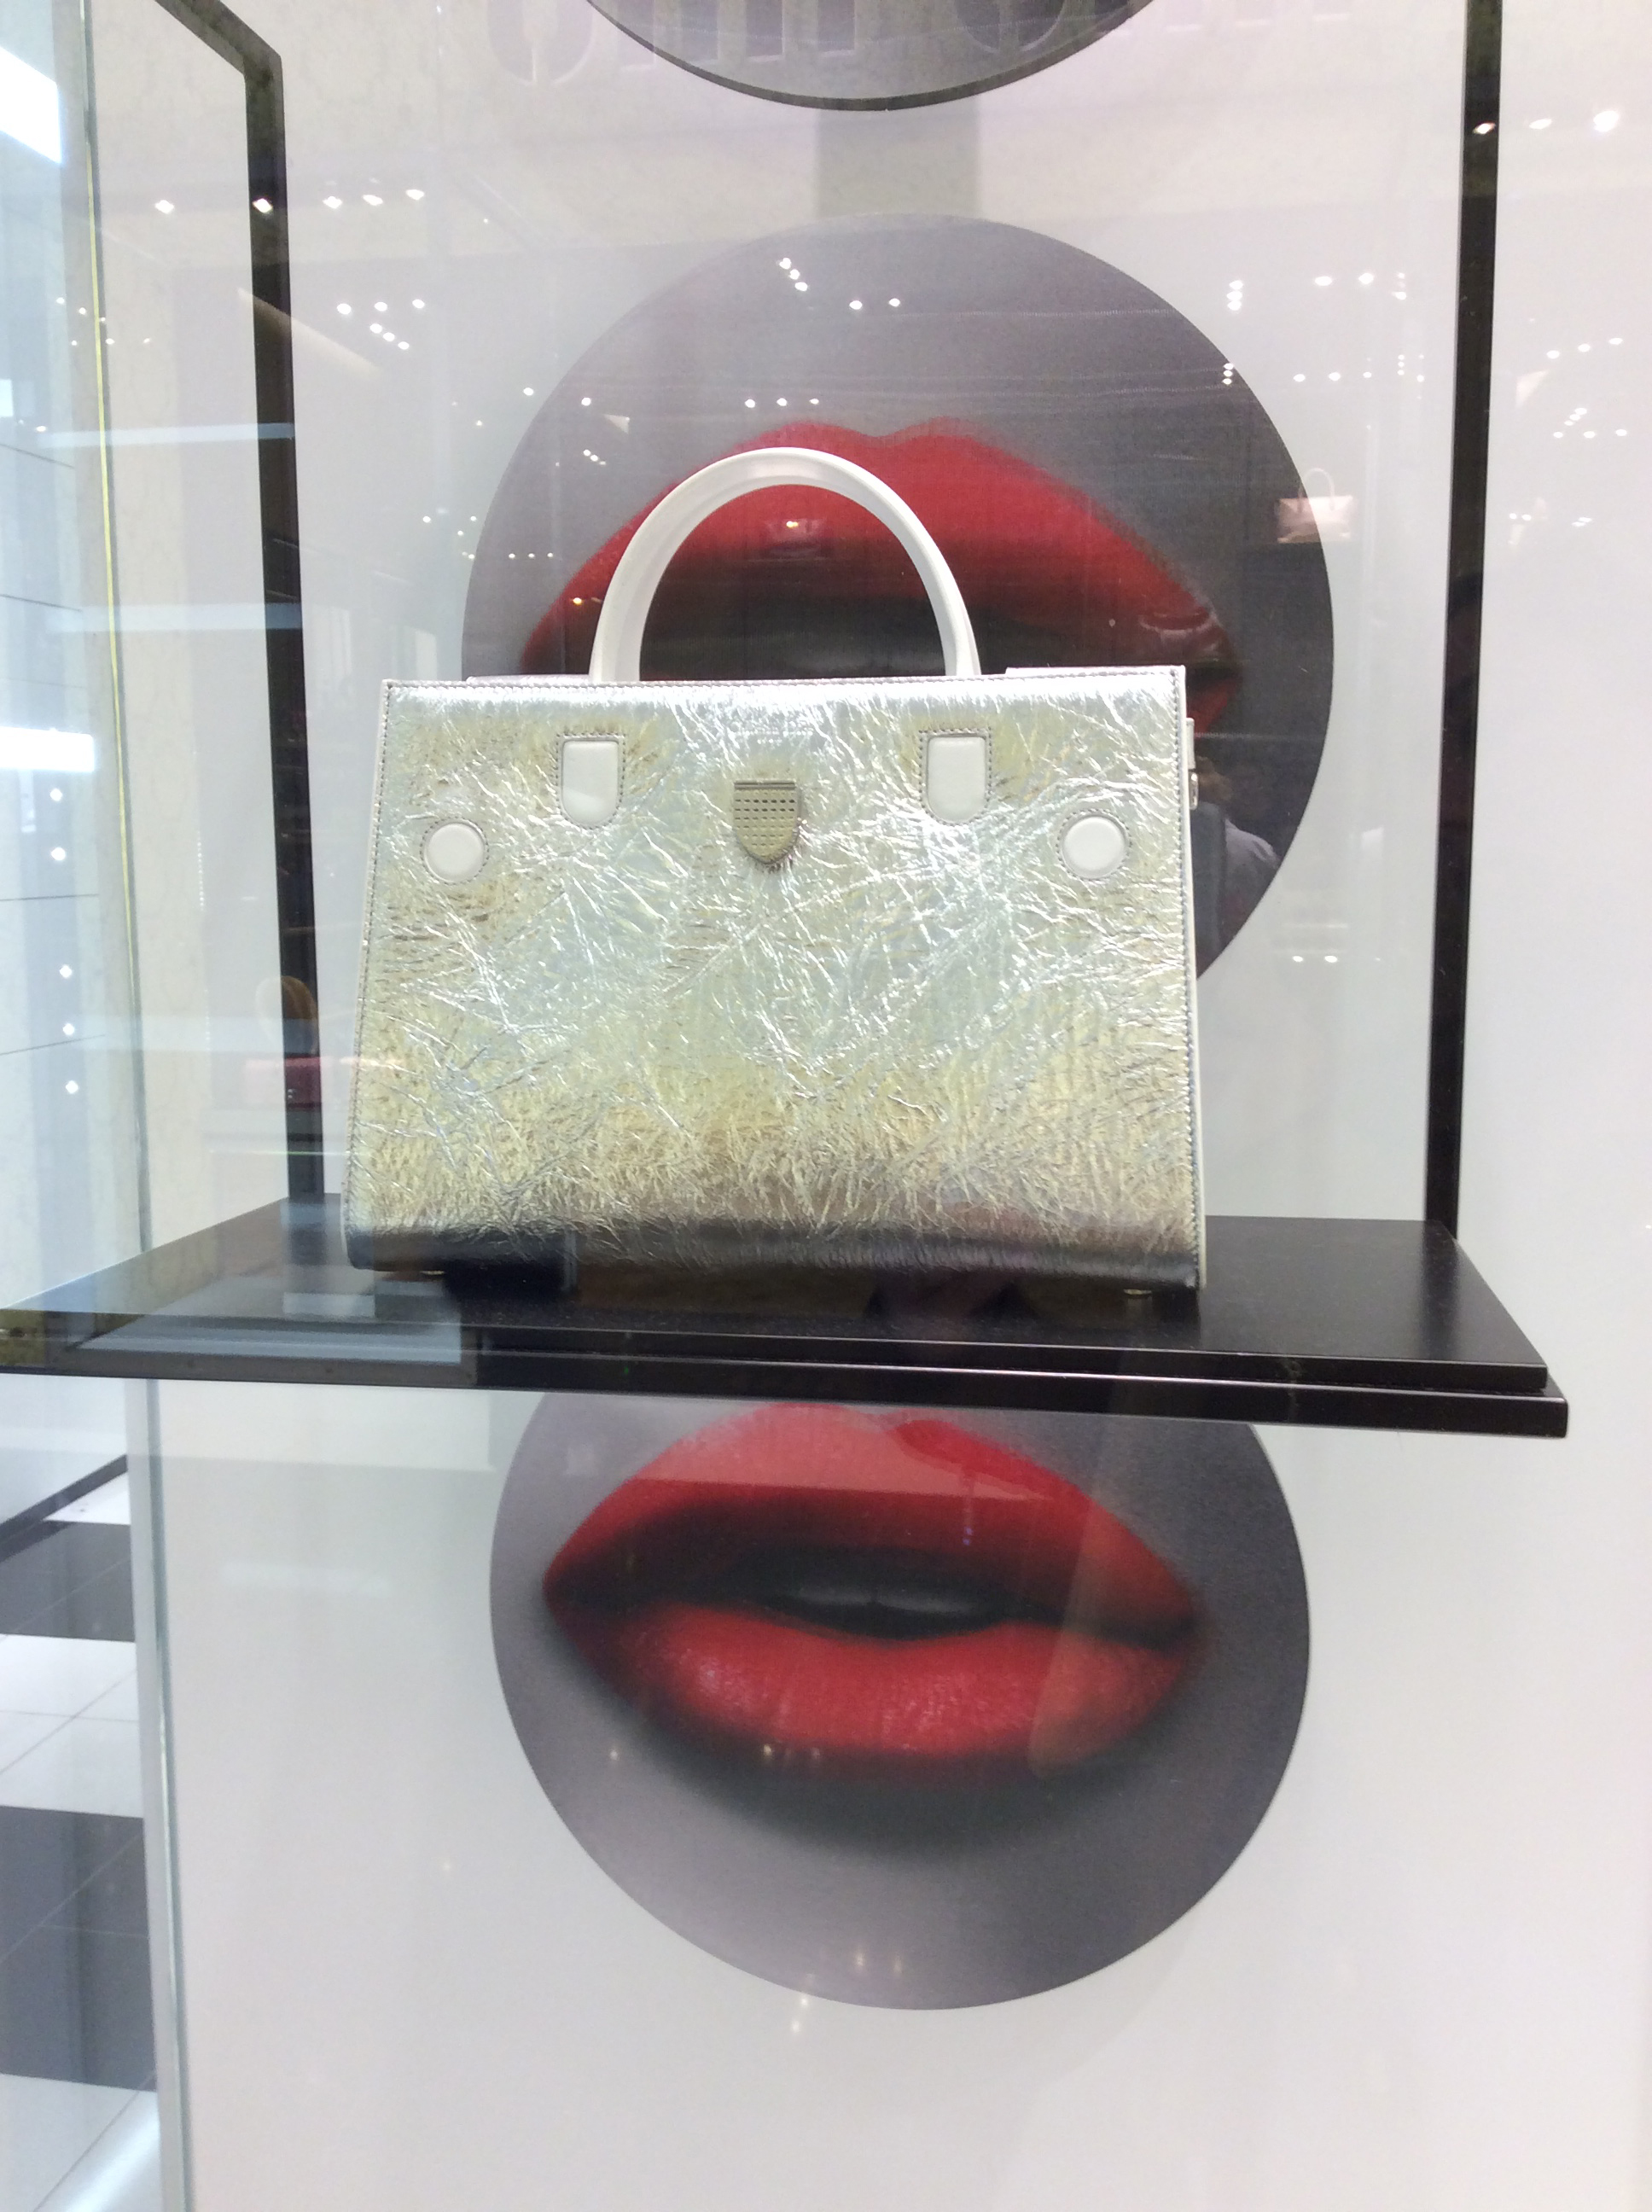 Christian Dior Shoes & Bags  In-Store Trends at Bloomingdale's - Fashion  Trendsetter